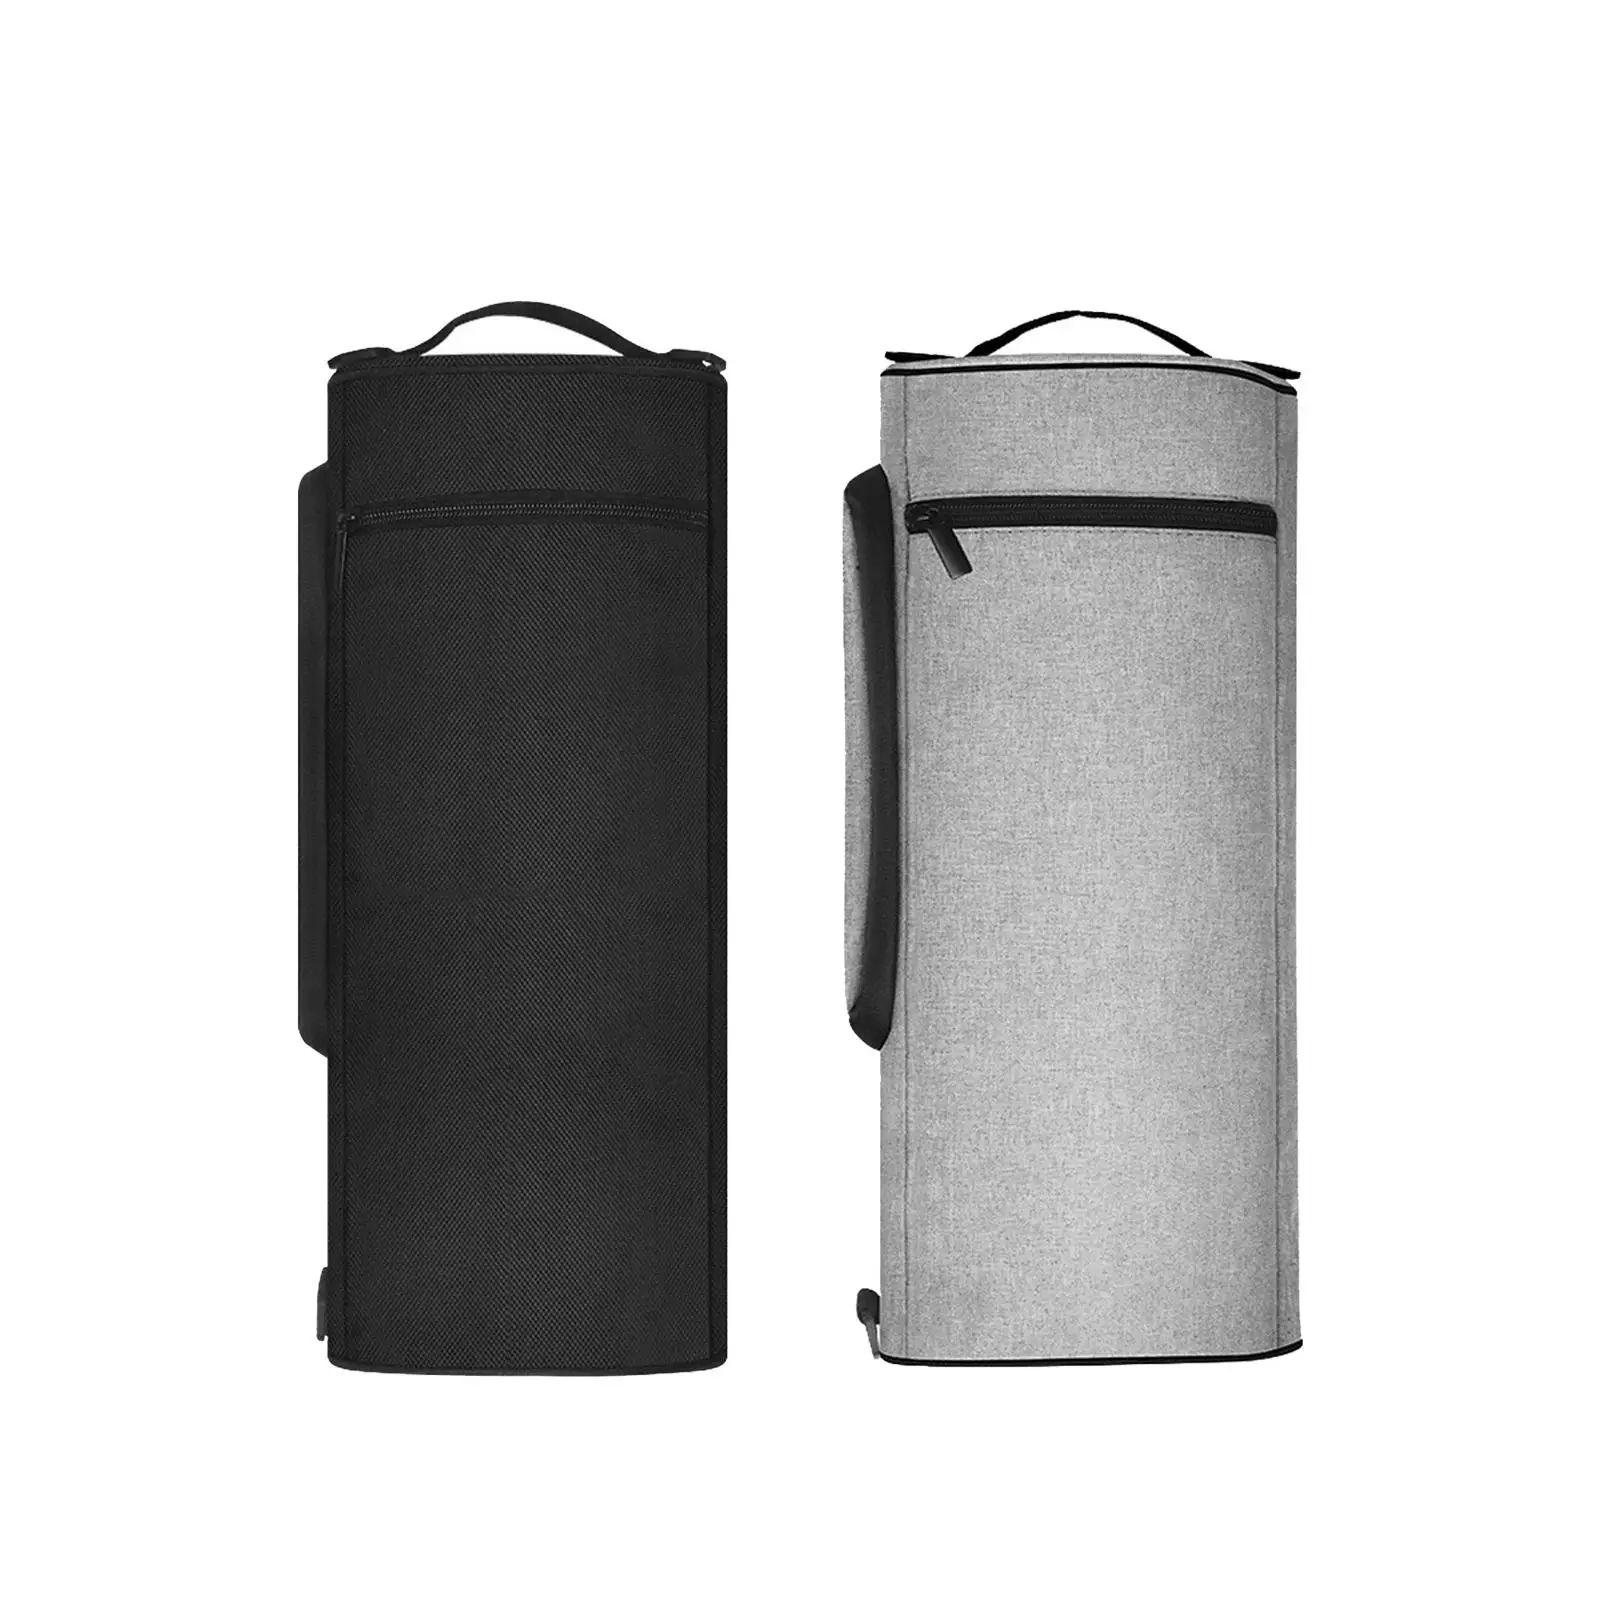 Golf Coolers Bag Holds Two Wine Bottles Soft Insulated Coolers Sleeve Insulated Coolers Bag Sleeve for Outdoor Picnic Camping